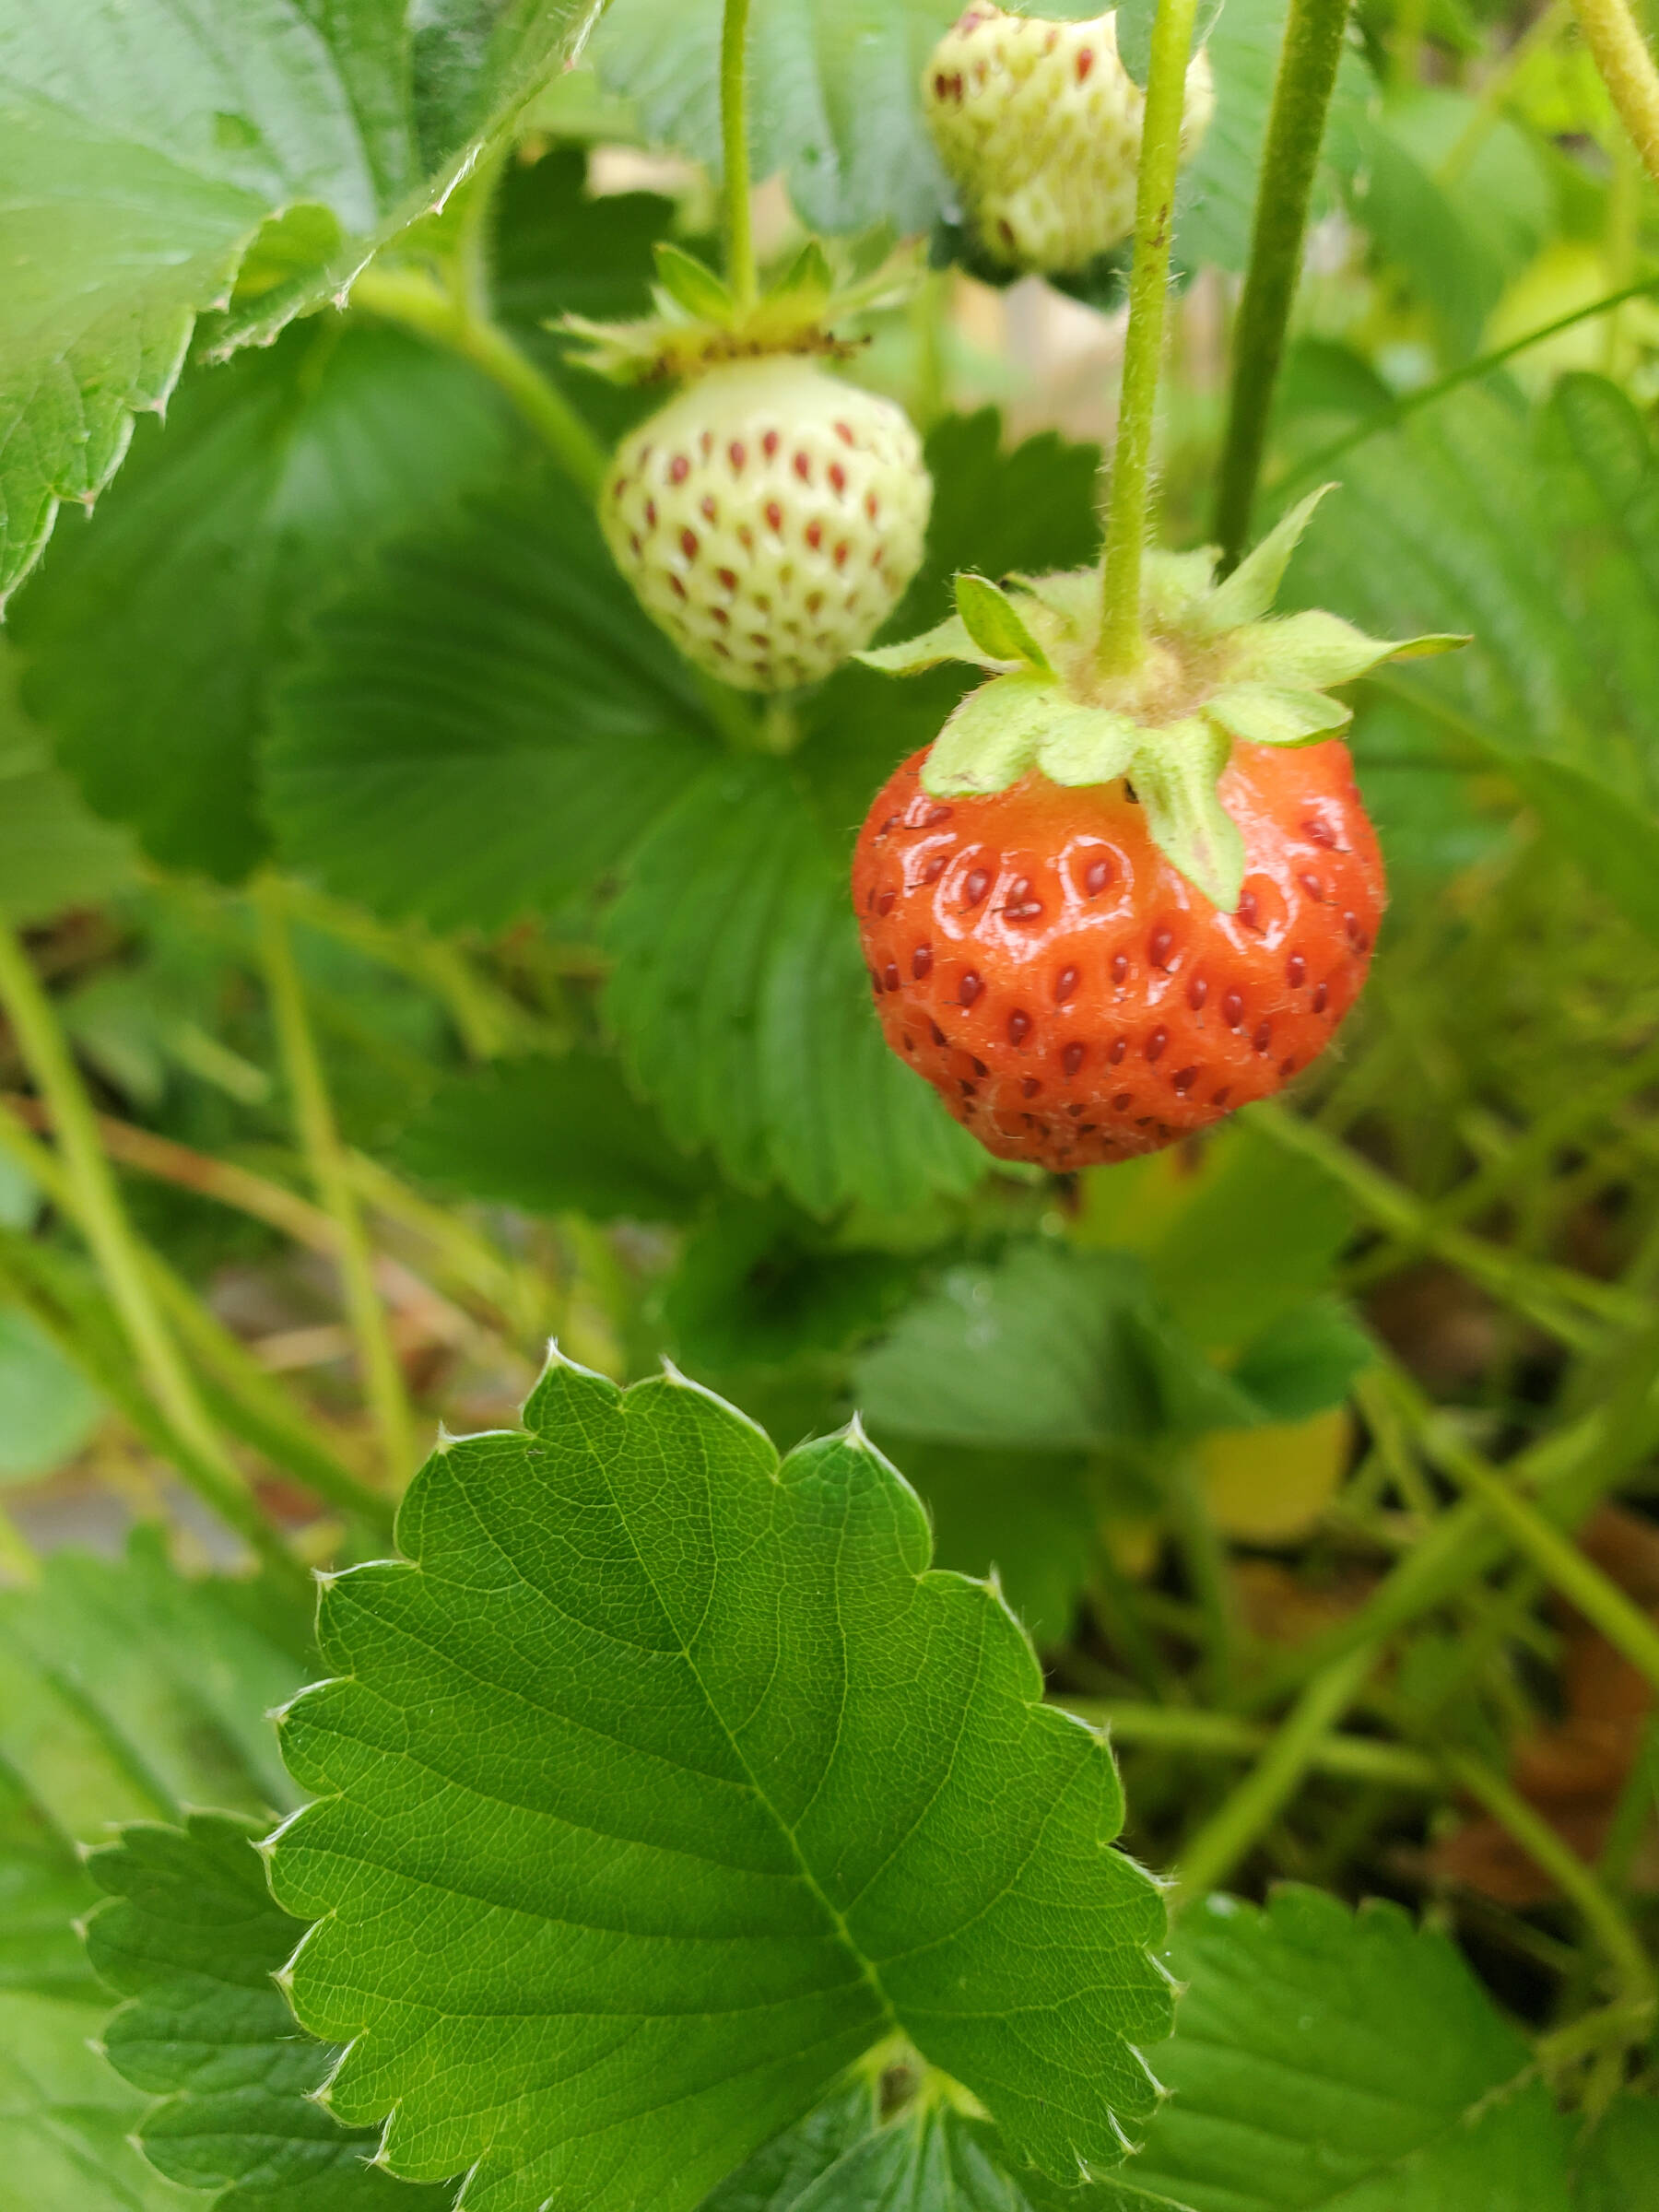 Wild strawberries are ripening on Friday, Aug. 25 in Anchor Point. (Delcenia Cosman/Homer News)